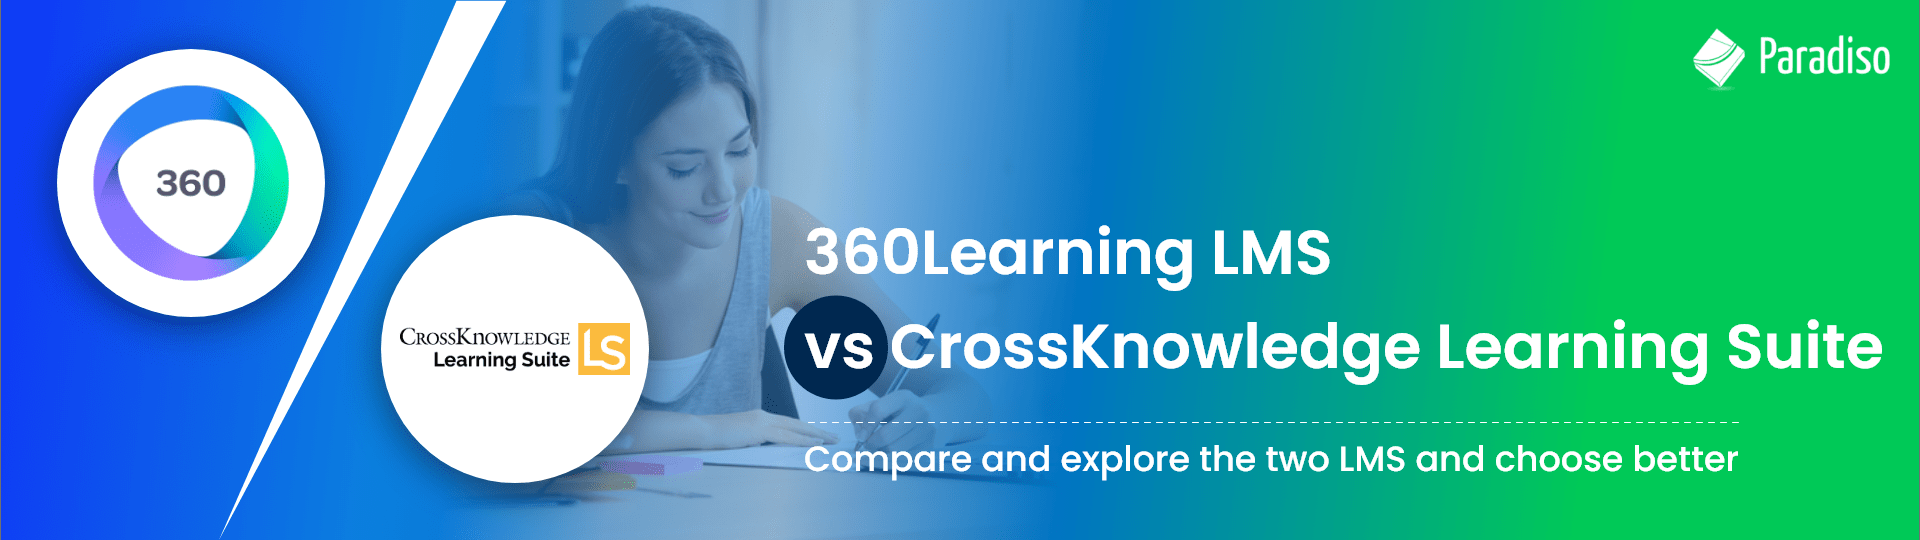 360Learning LMS vs Crossknowledge Learning Suite